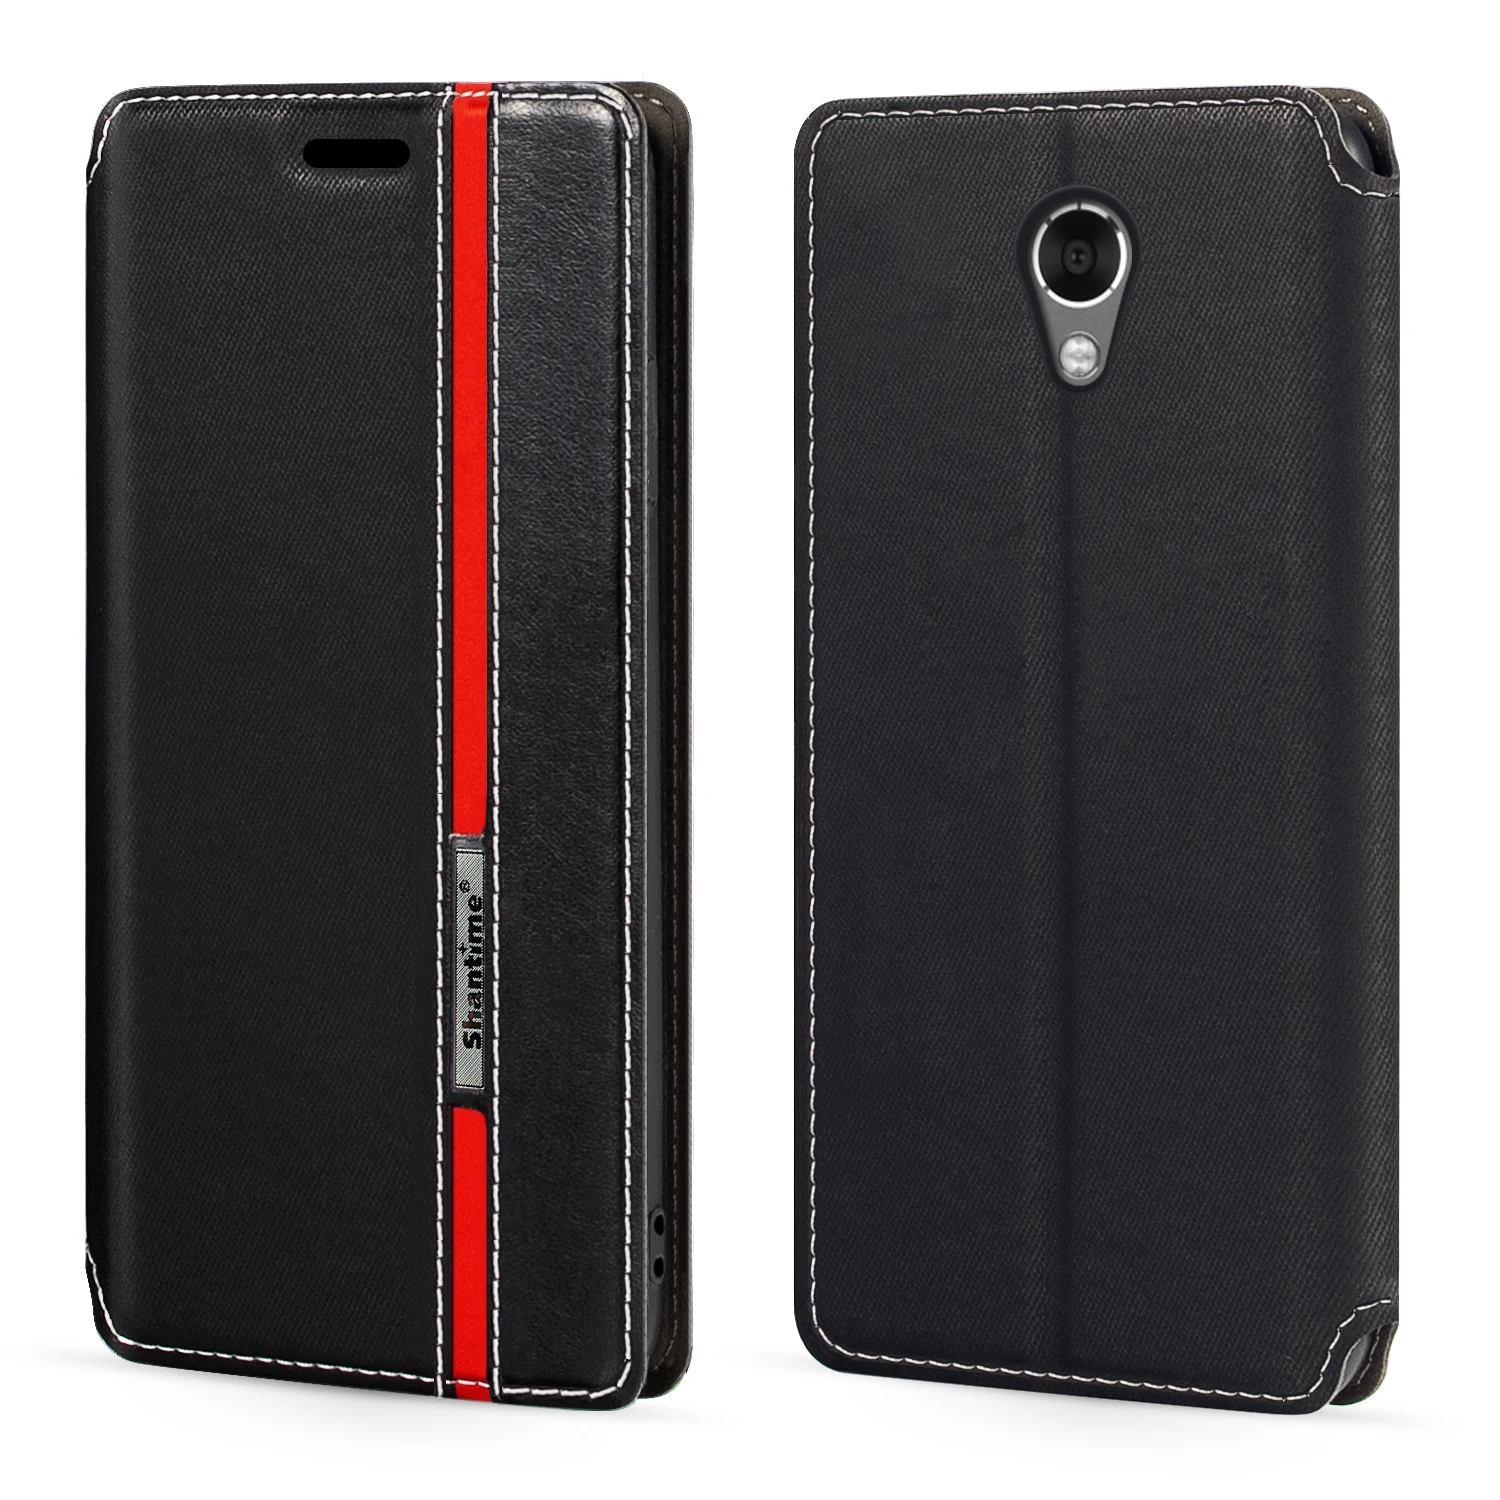 For Lenovo Vibe P2 Case Fashion Multicolor Magnetic Closure Leather Flip Case Cover with Card Holder 5.5 inches